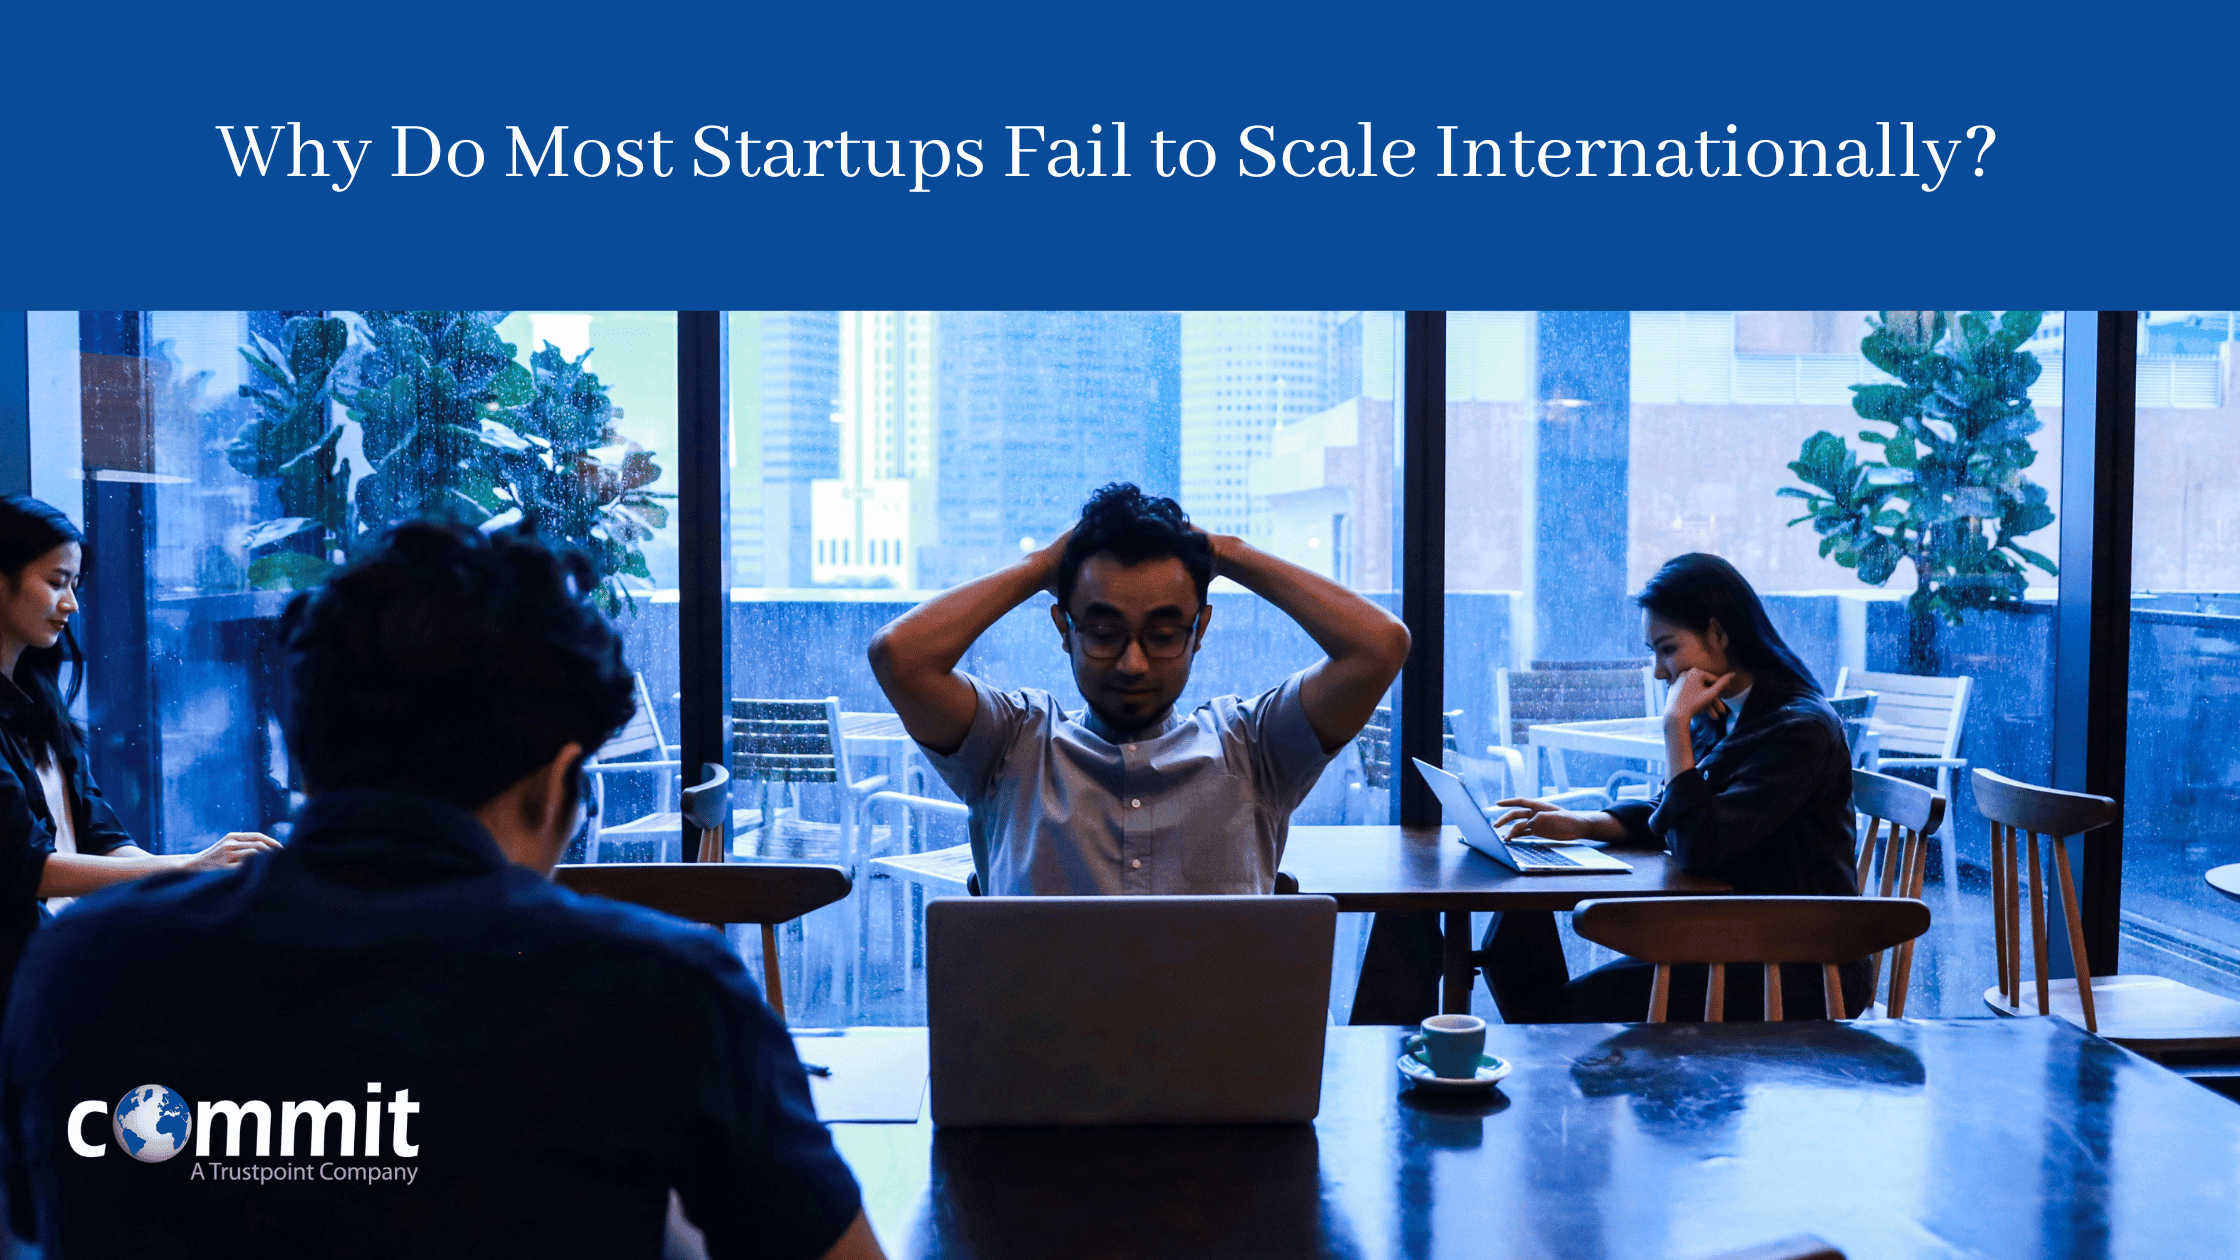 Why Do Most Startups Fail to Scale Internationally?